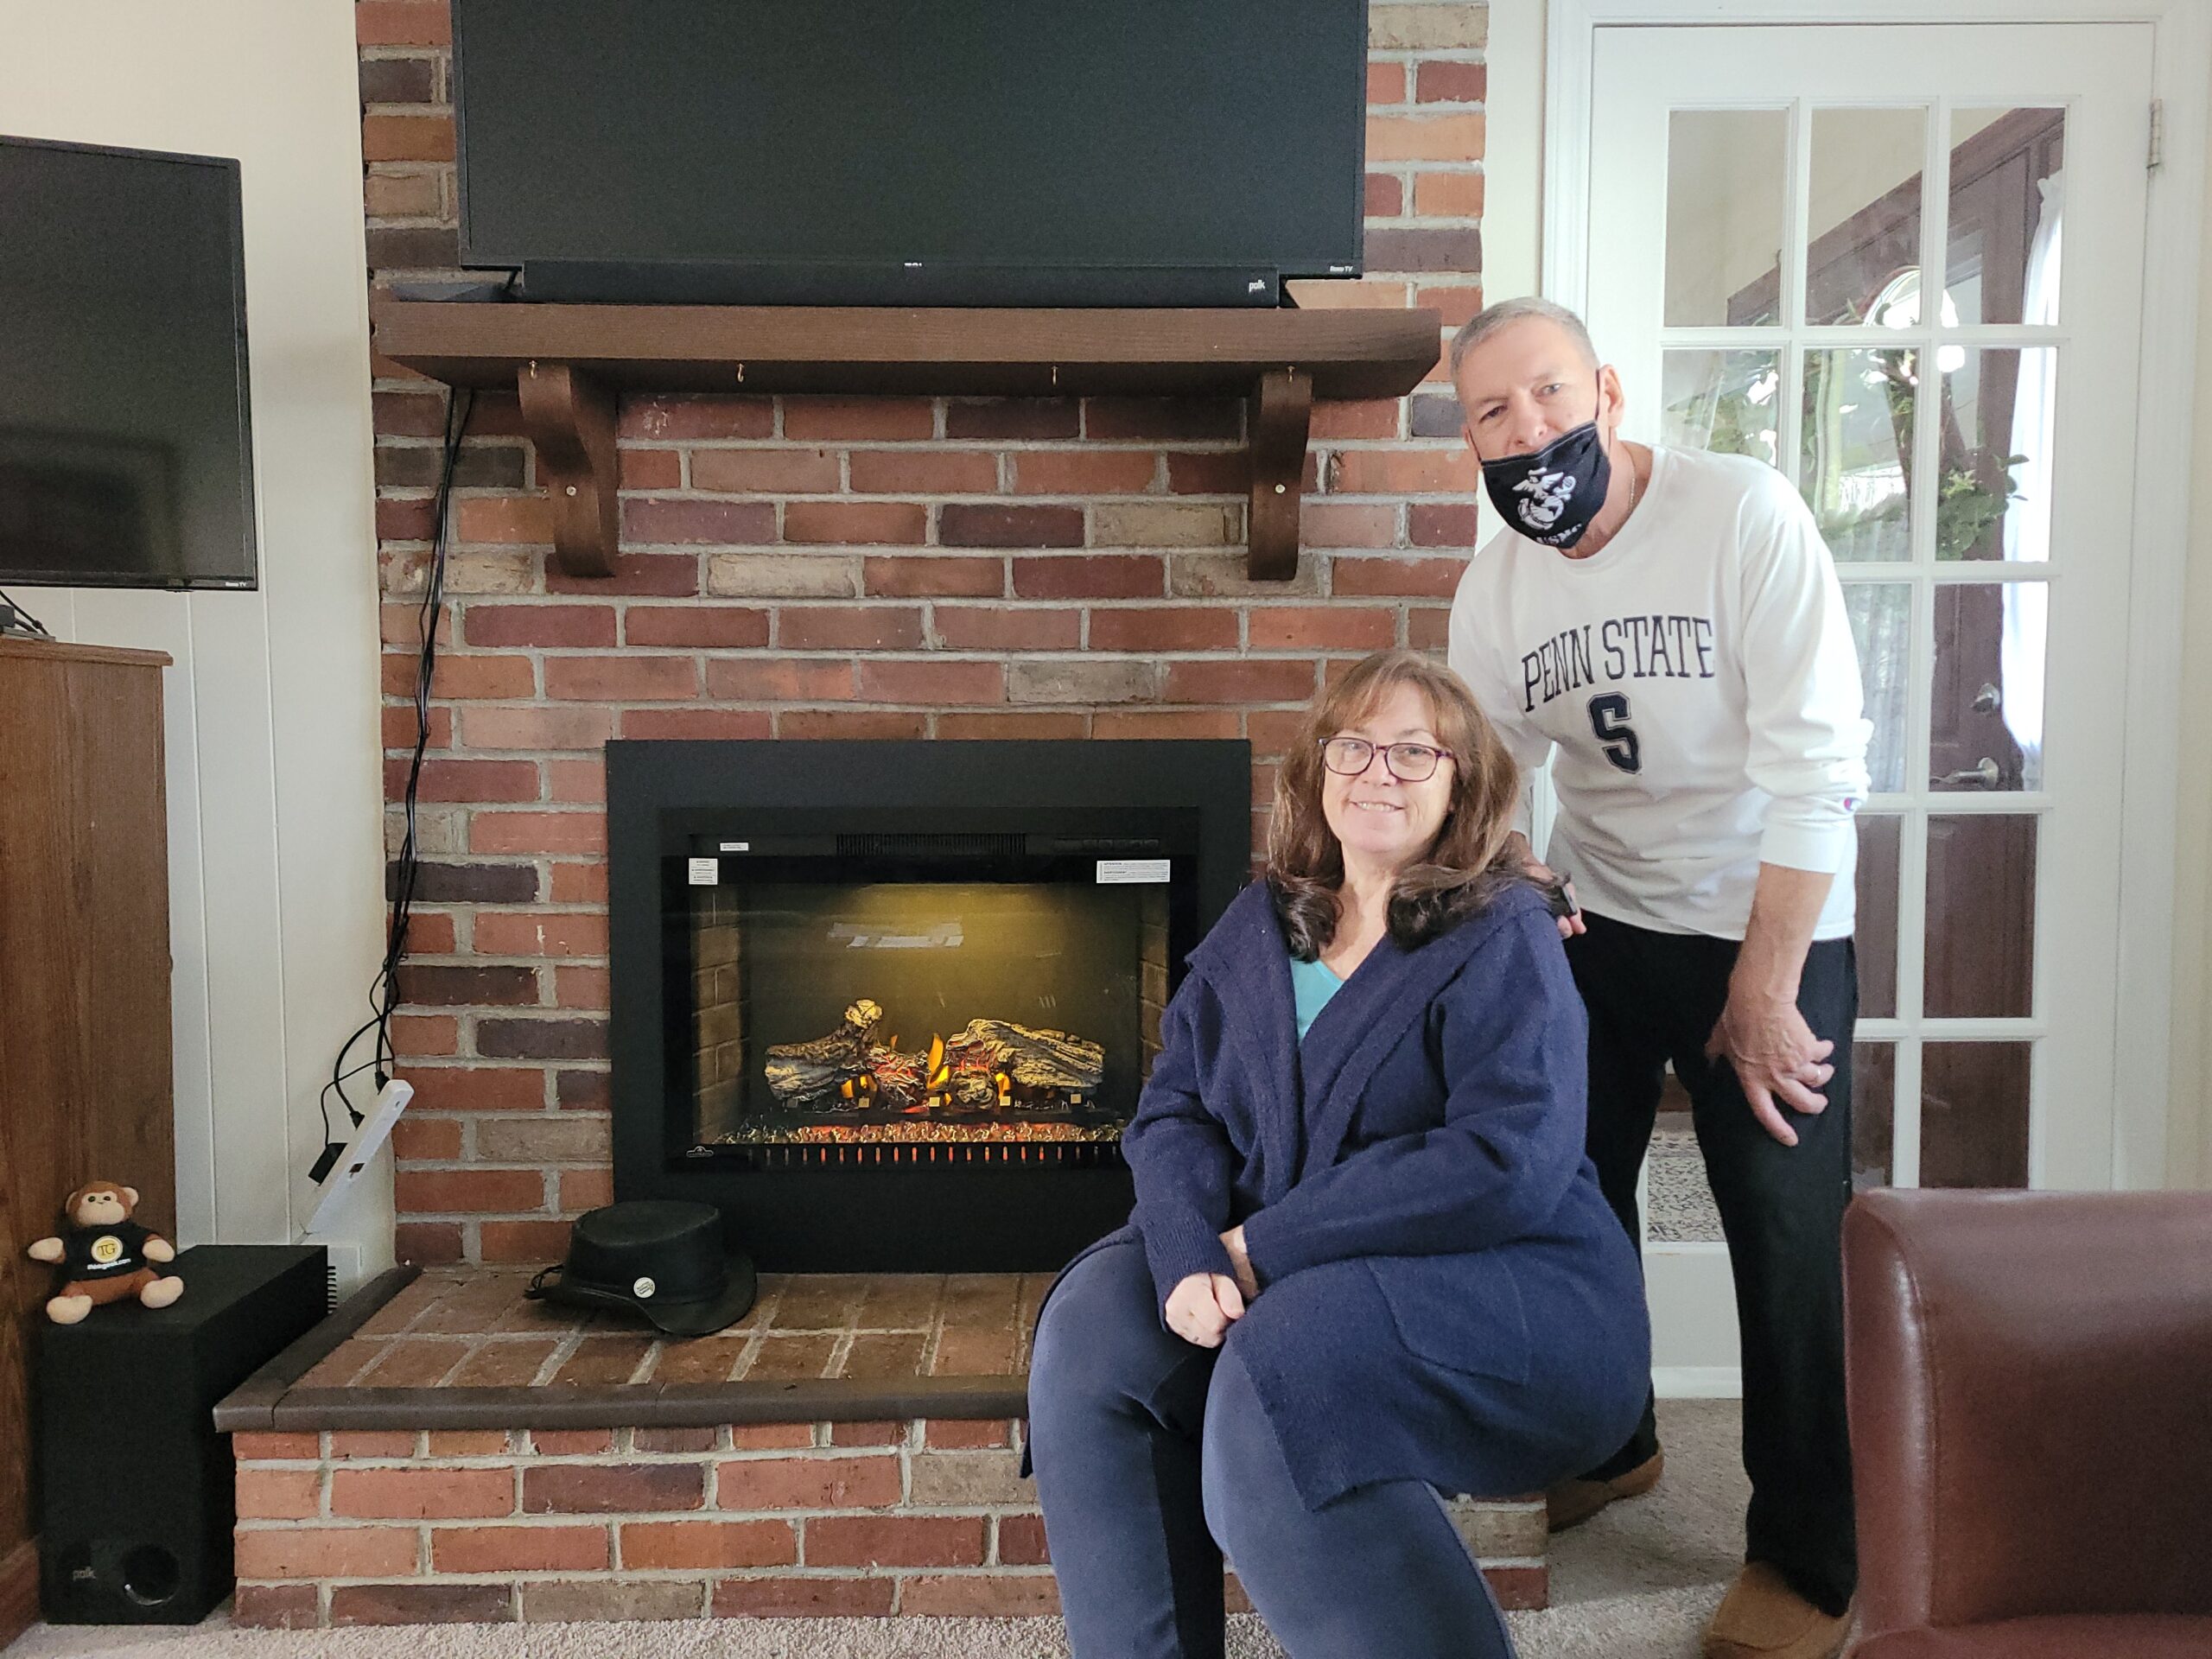 Electric Fireplace Project Photo